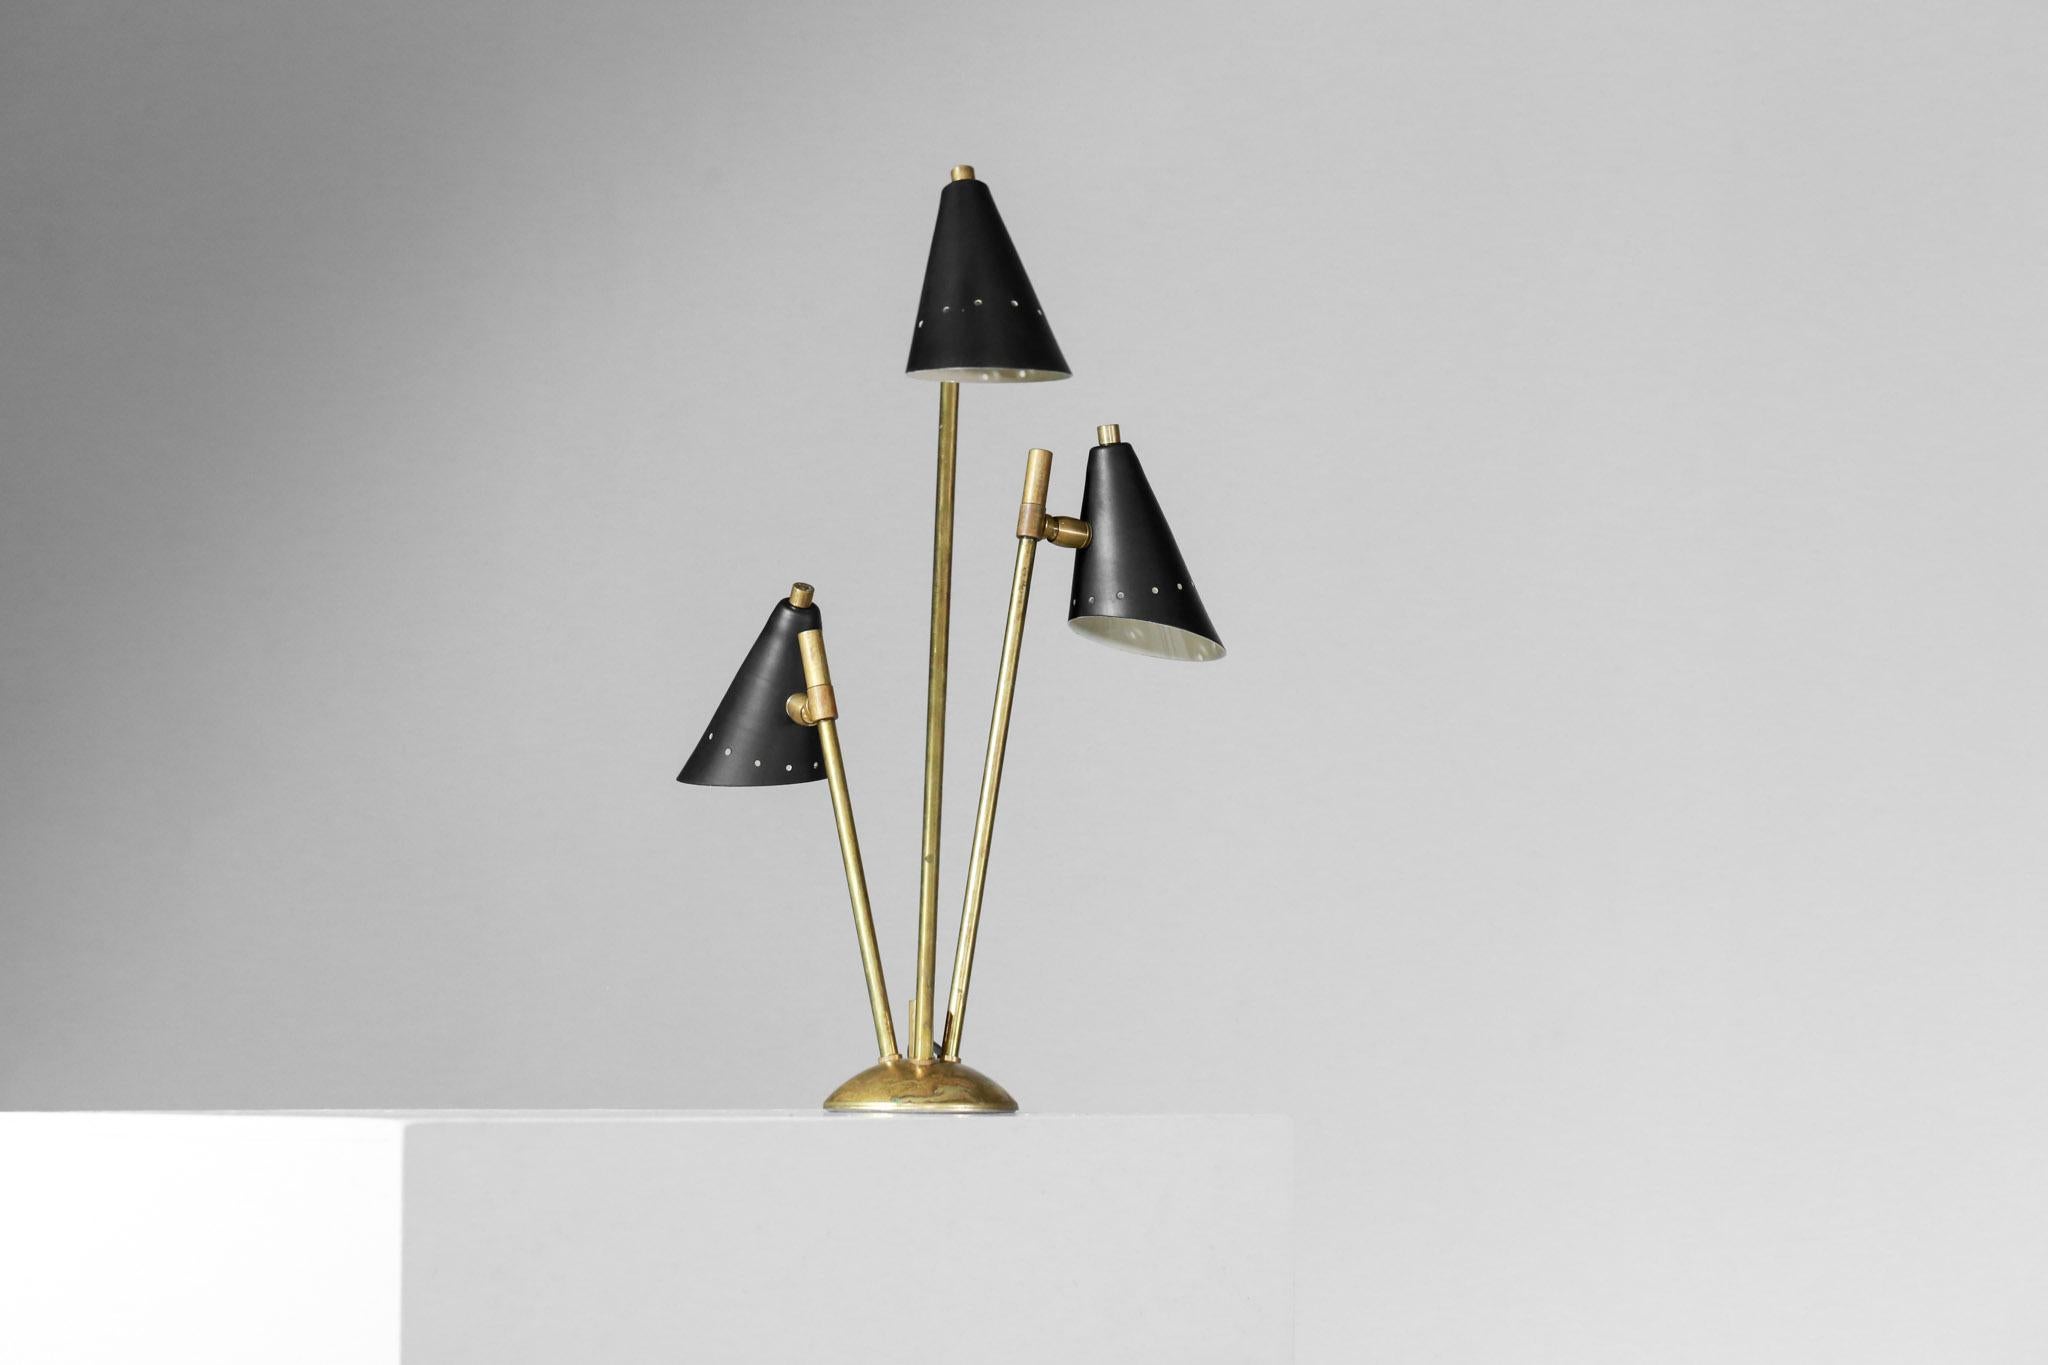 Modern desk or bedside lamp in the Gino Sarfati style of the 1960s.
Solid brass structure and three black or white lacquered metal shade. Total height 48 cm, total diameter 34 cm (base diameter 11 cm and shade diameter 8 cm). Handcrafted in